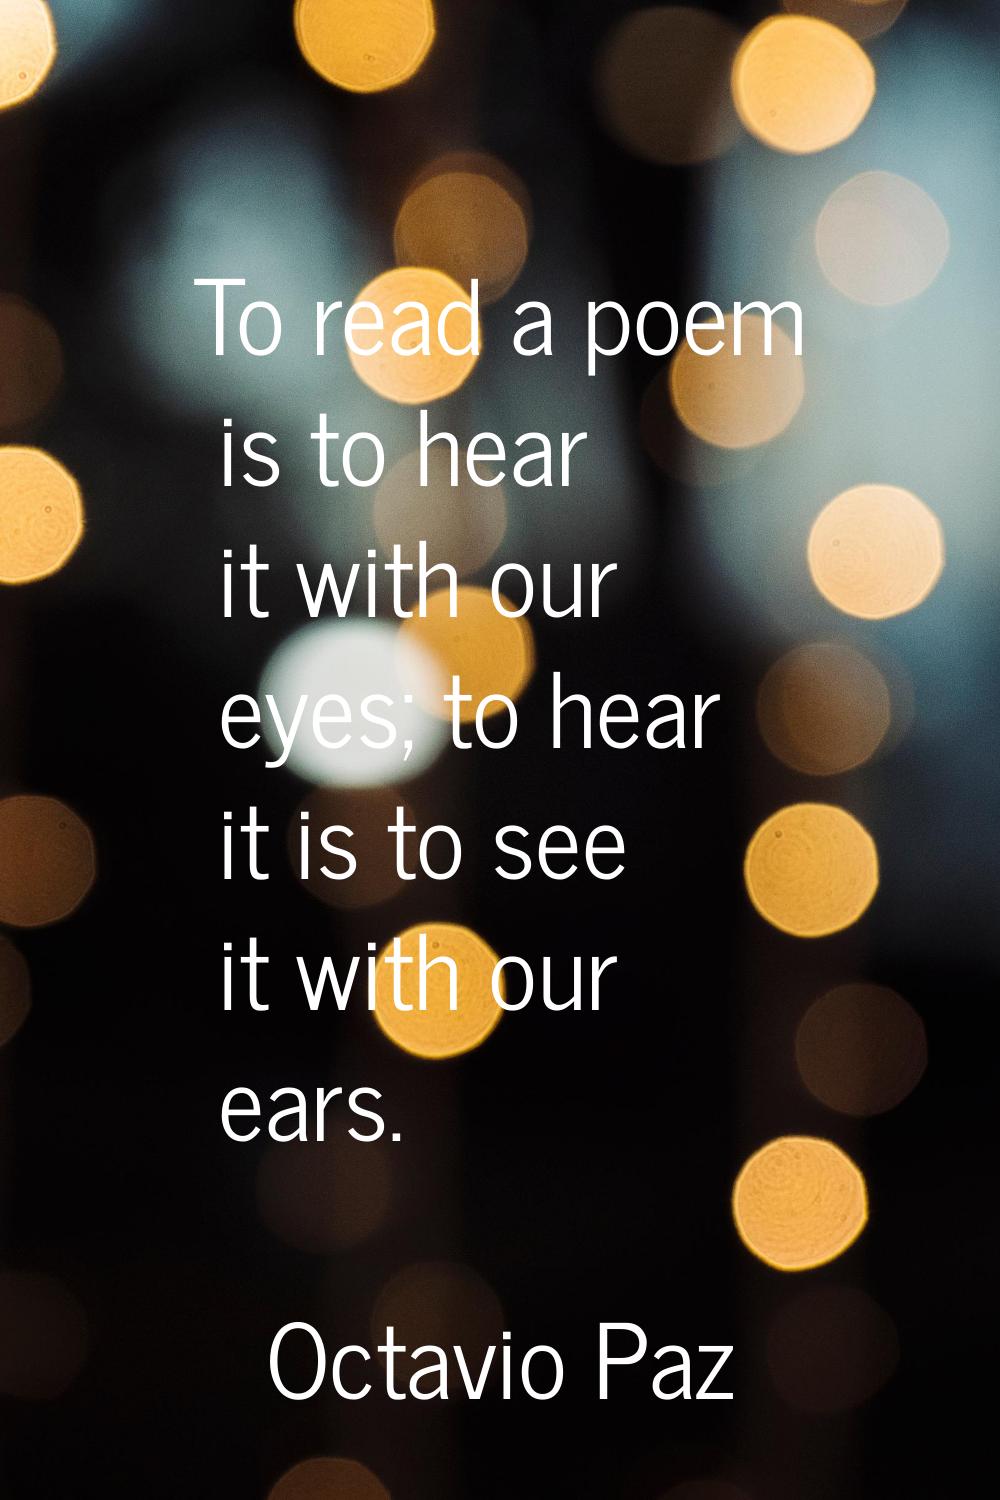 To read a poem is to hear it with our eyes; to hear it is to see it with our ears.